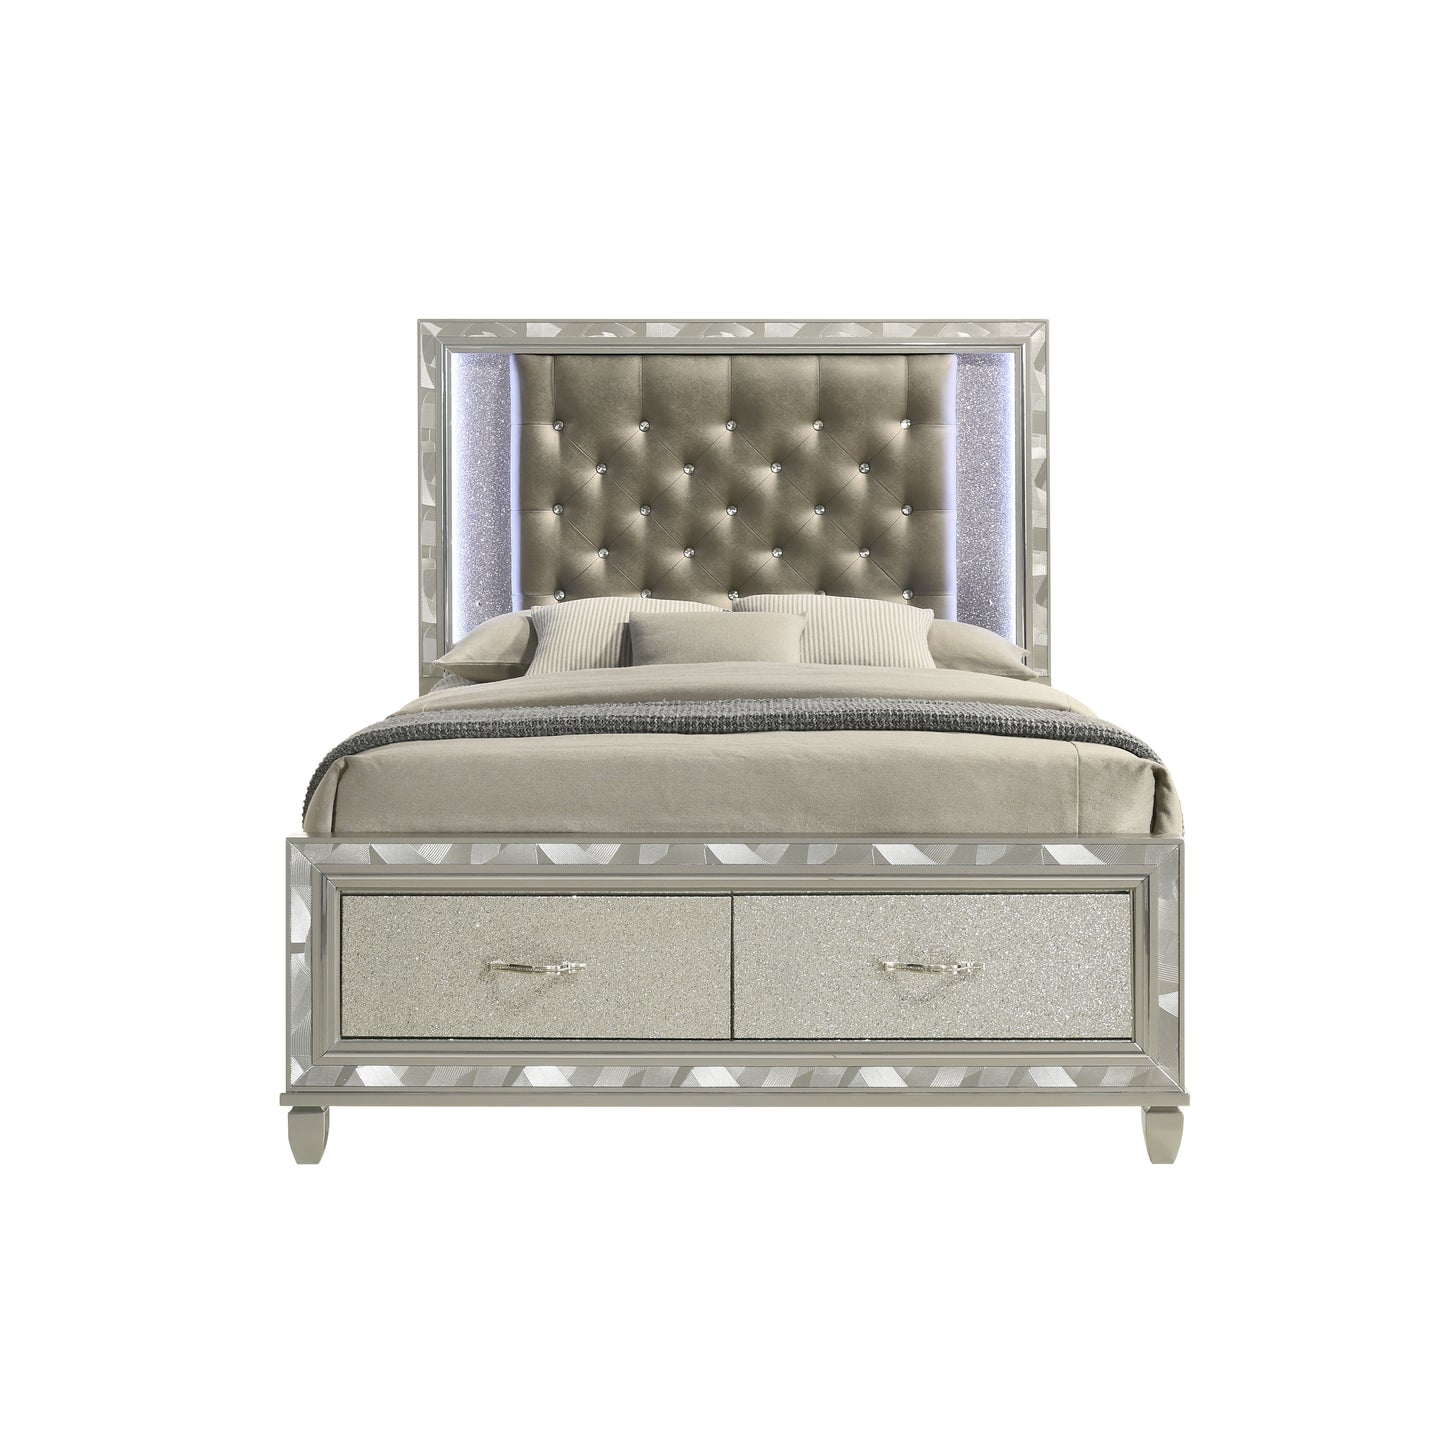 Radiance Queen Lighted Storage Bed